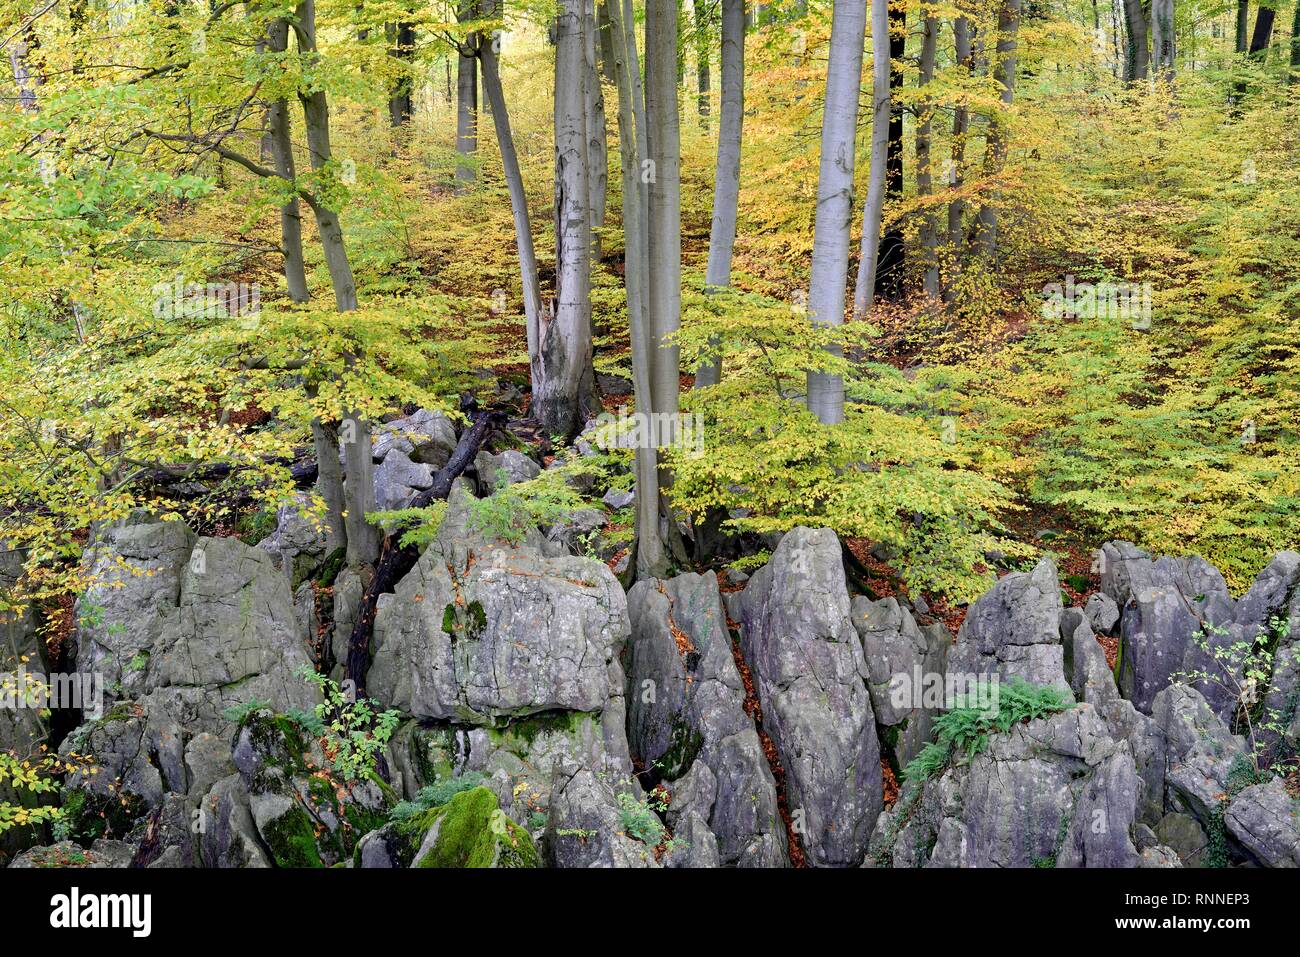 Autumn atmosphere in the rugged rocky landscape, deciduous forest with Common beeches (Fagus sylvatica) Stock Photo